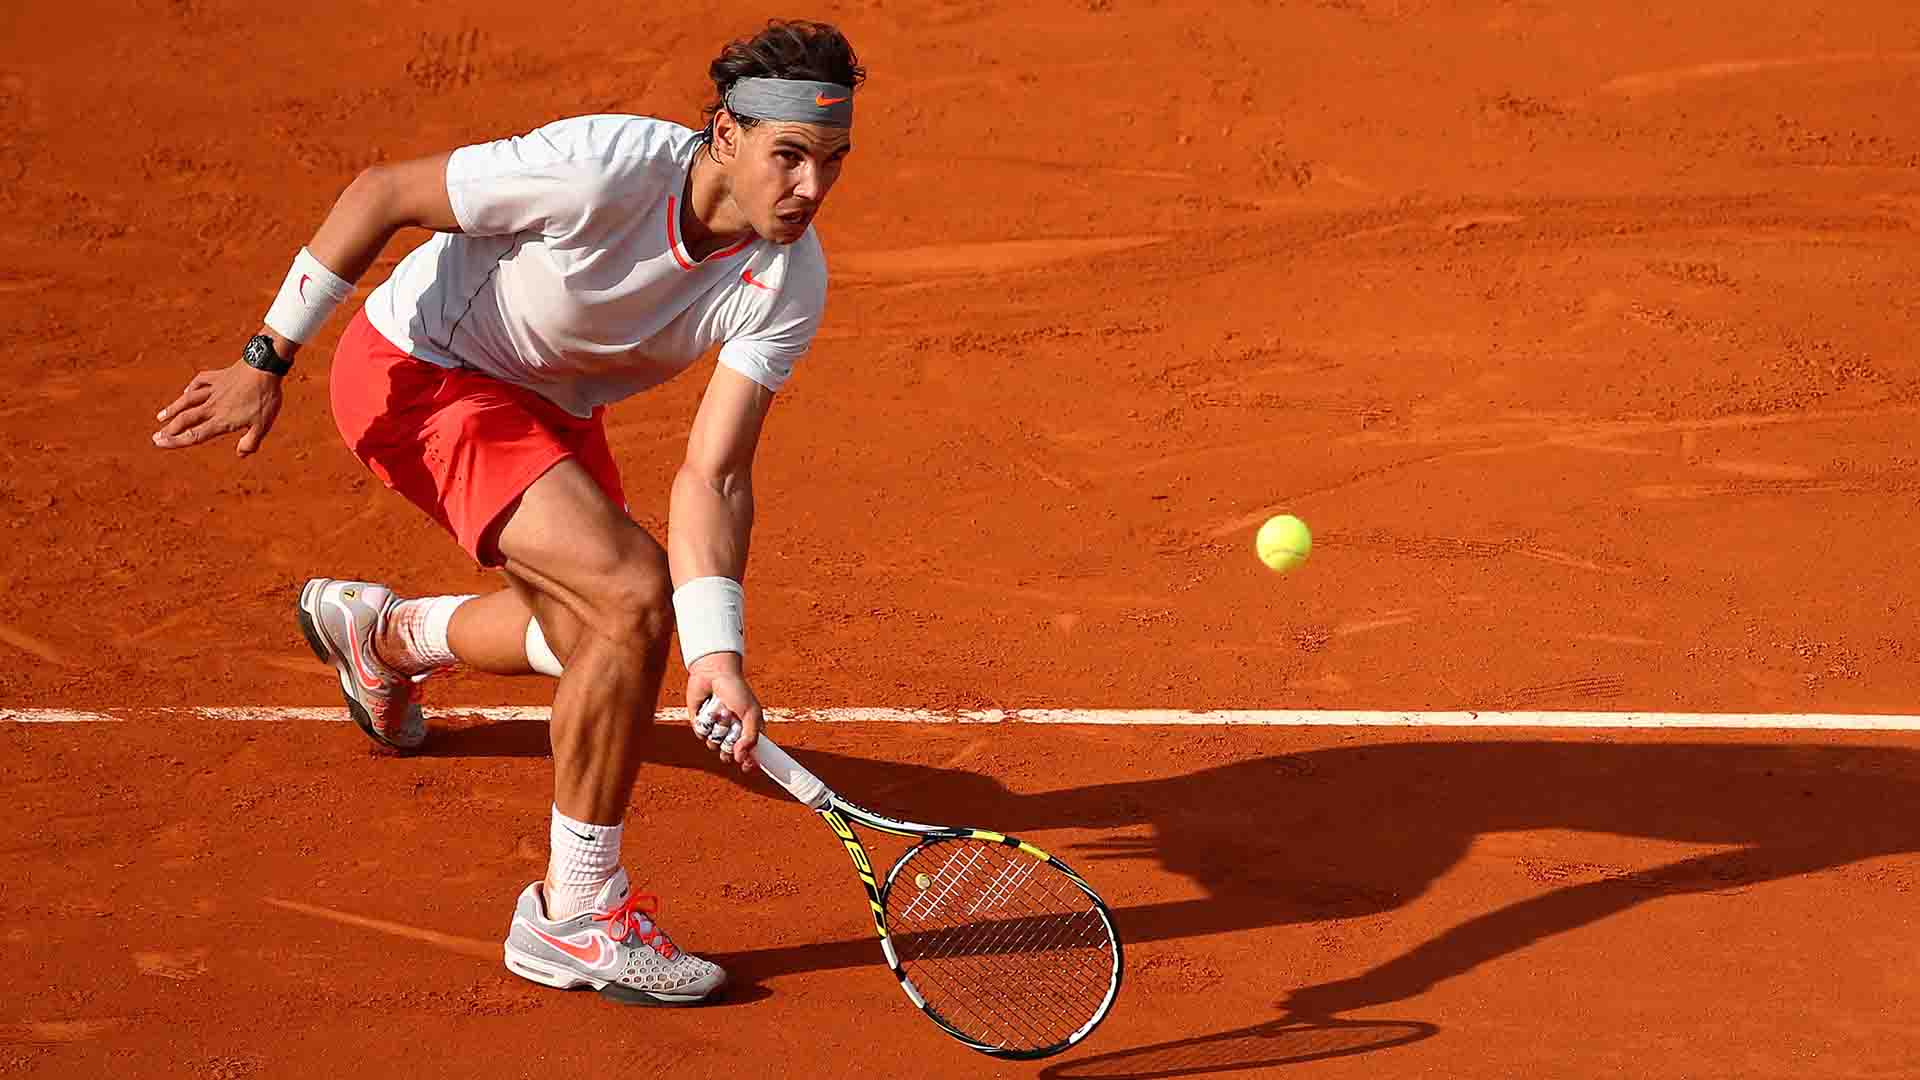 Rafael Nadal beats countryman David Ferrer 6-3, 6-2, 6-3 to win his eighth Roland Garros title and match Roy Emerson’s mark of 12 Grand Slam crowns.